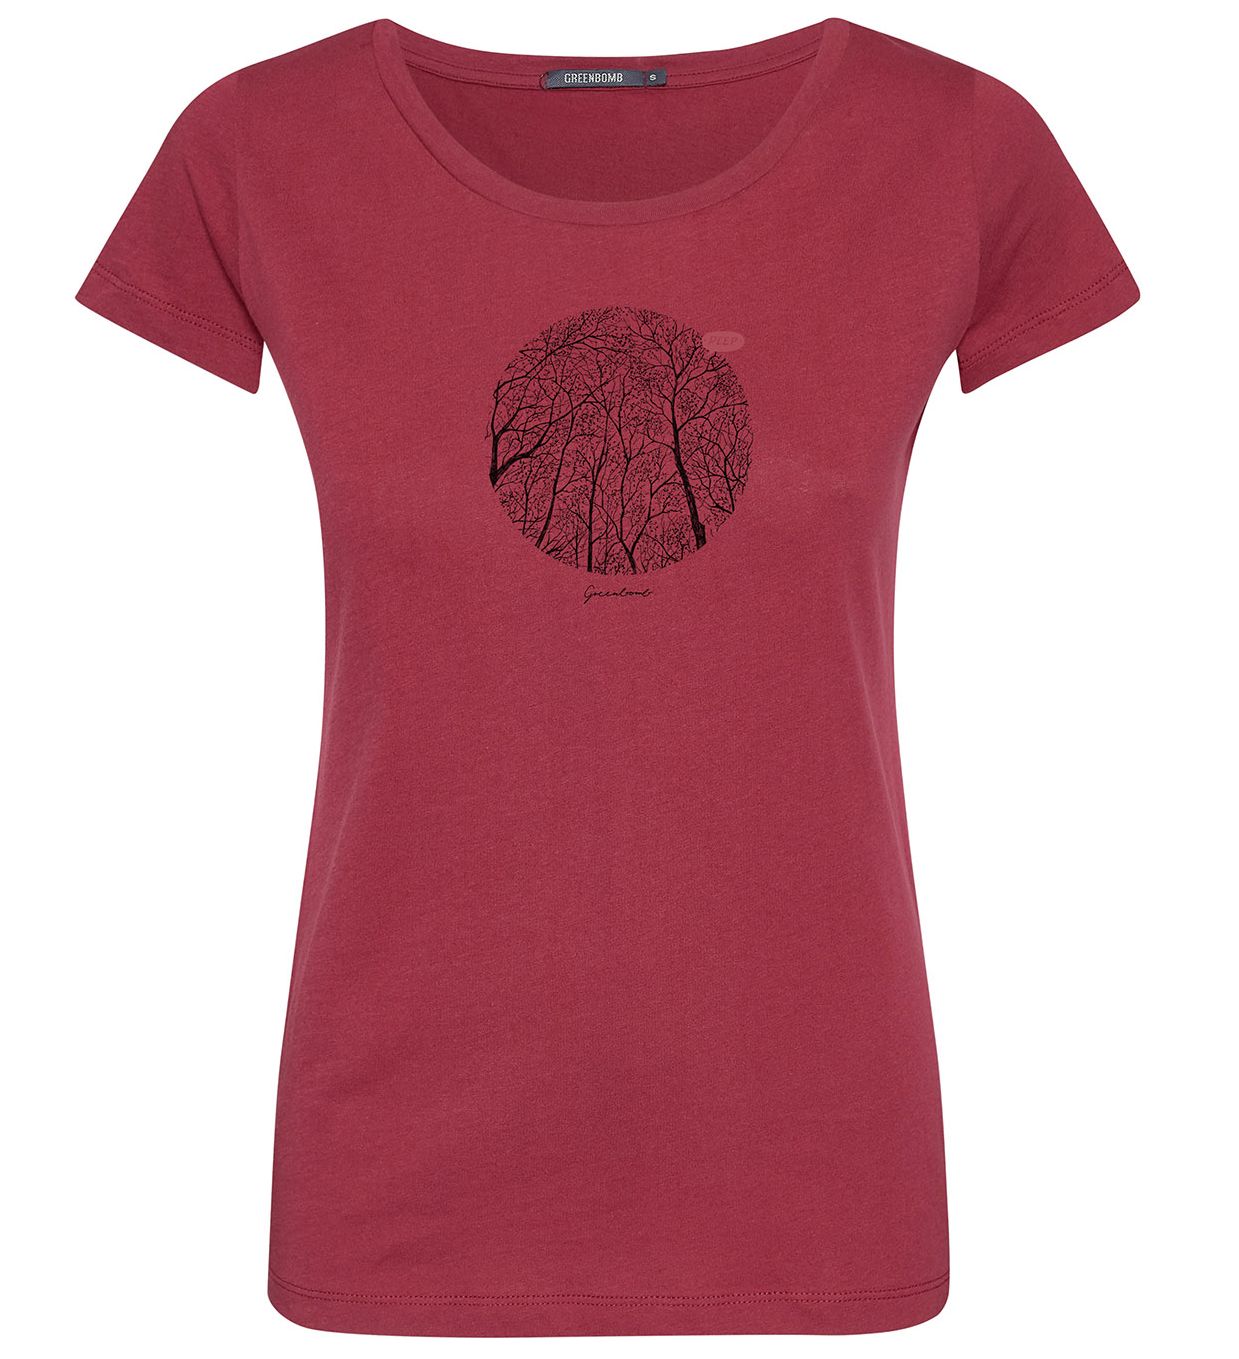 Print T-Shirt Nature Branch Circle Loves Berry Blossom